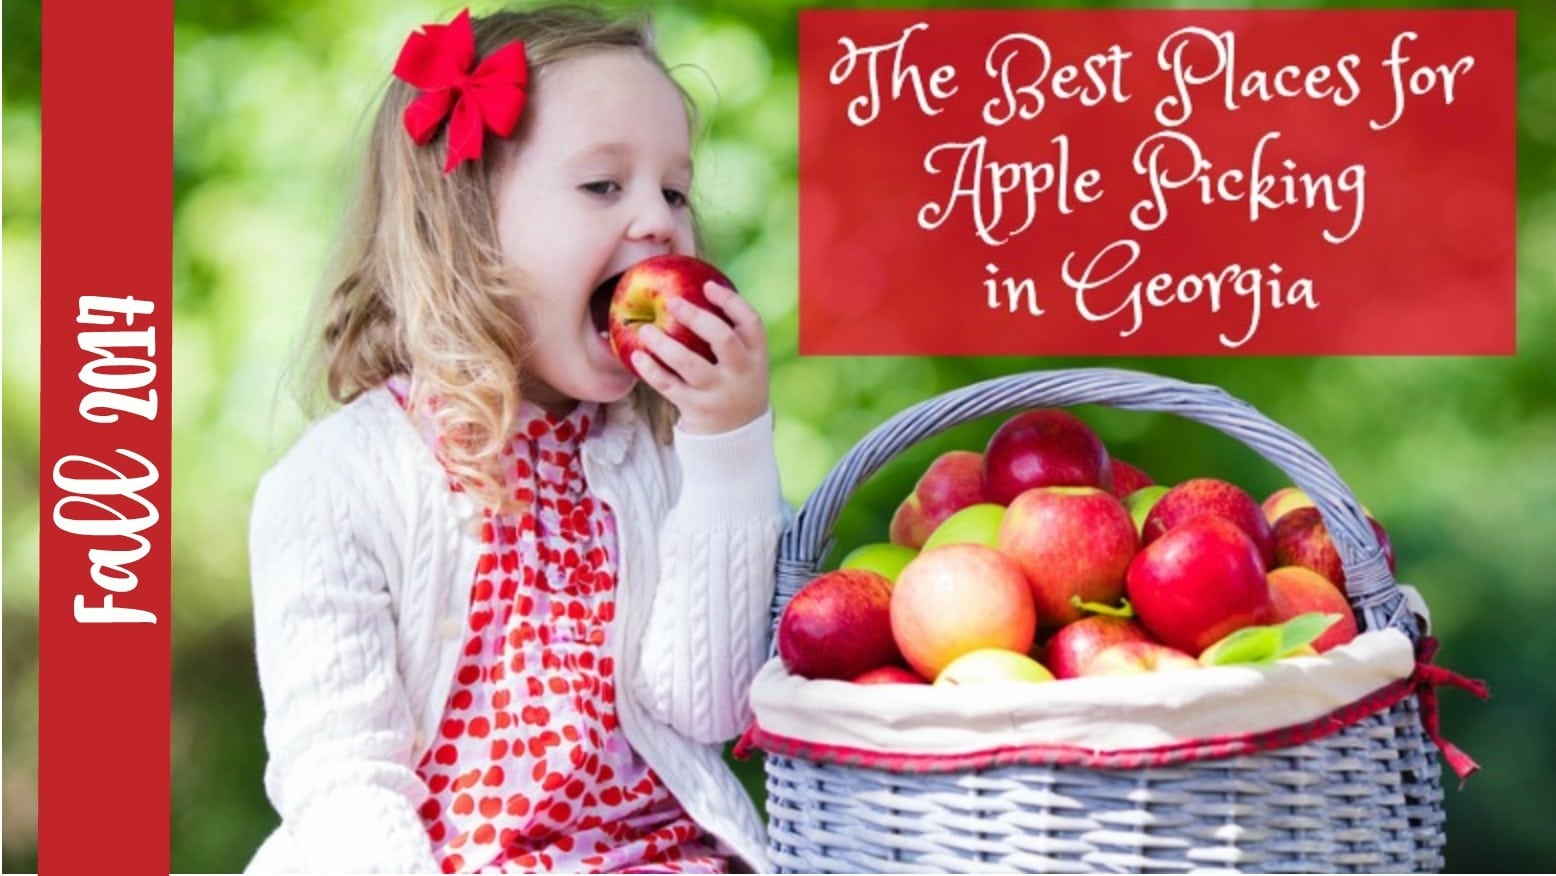 The apple am little. Picking Apples. The best time for Apples картинки. Джорджия яблоко. Picking Apples picture for Kids.